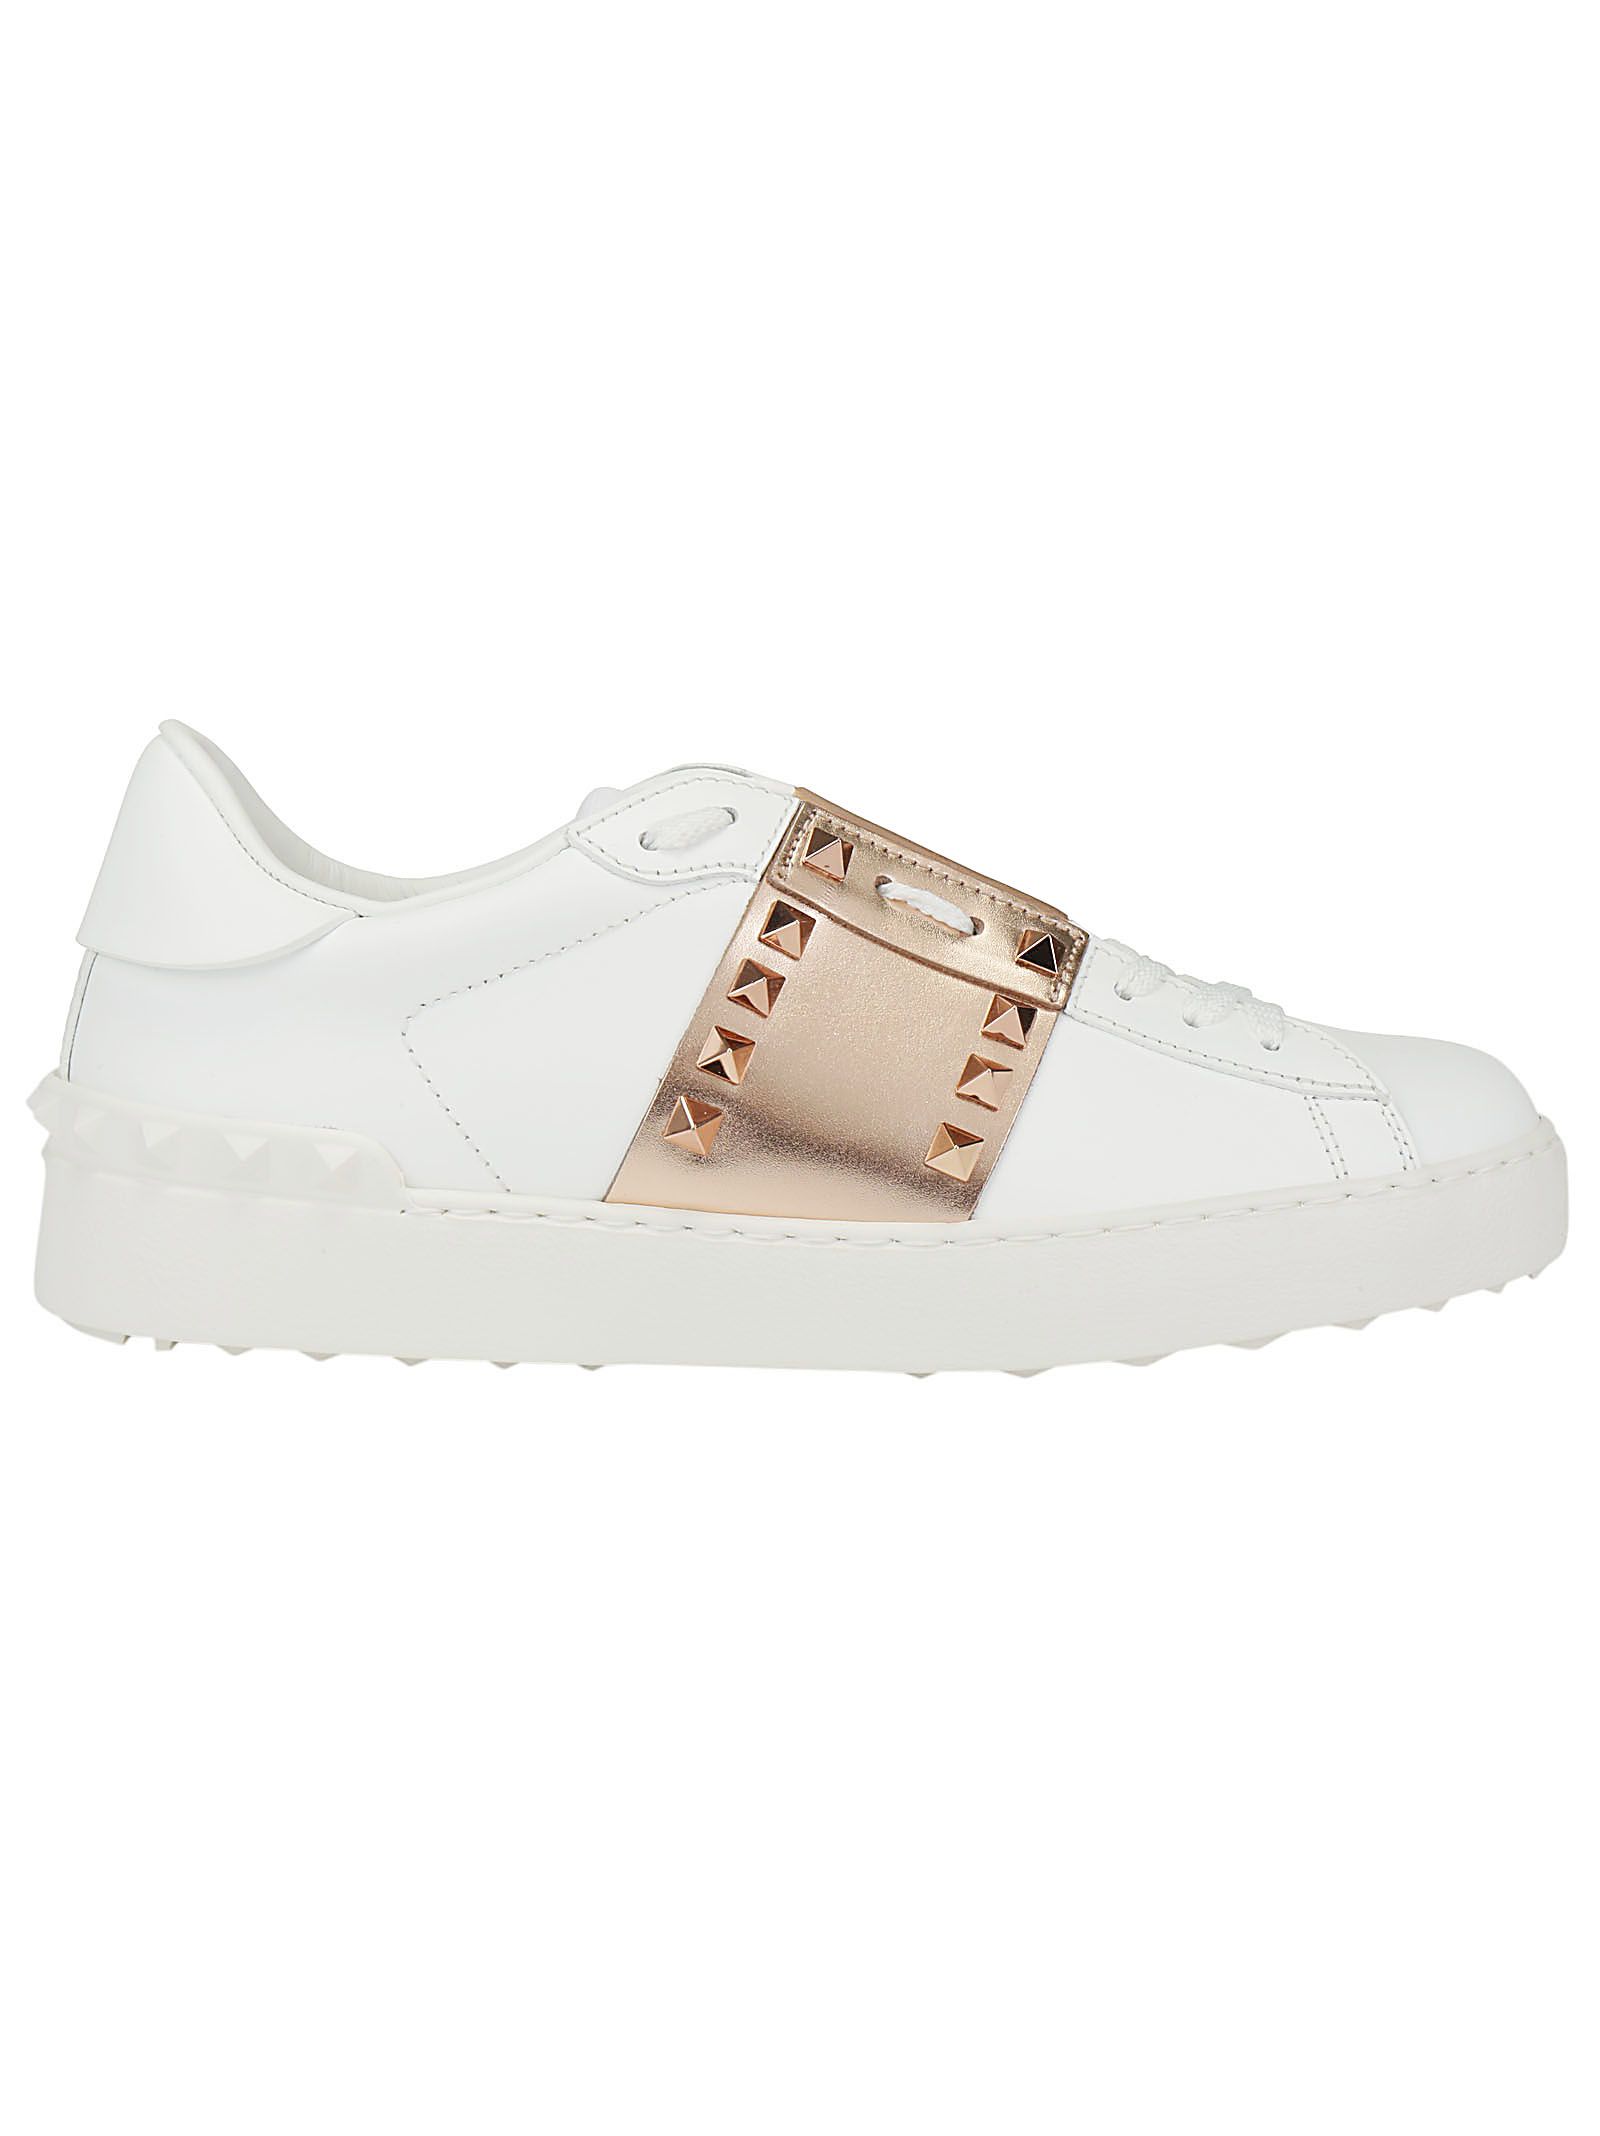 valentino rose gold sneakers